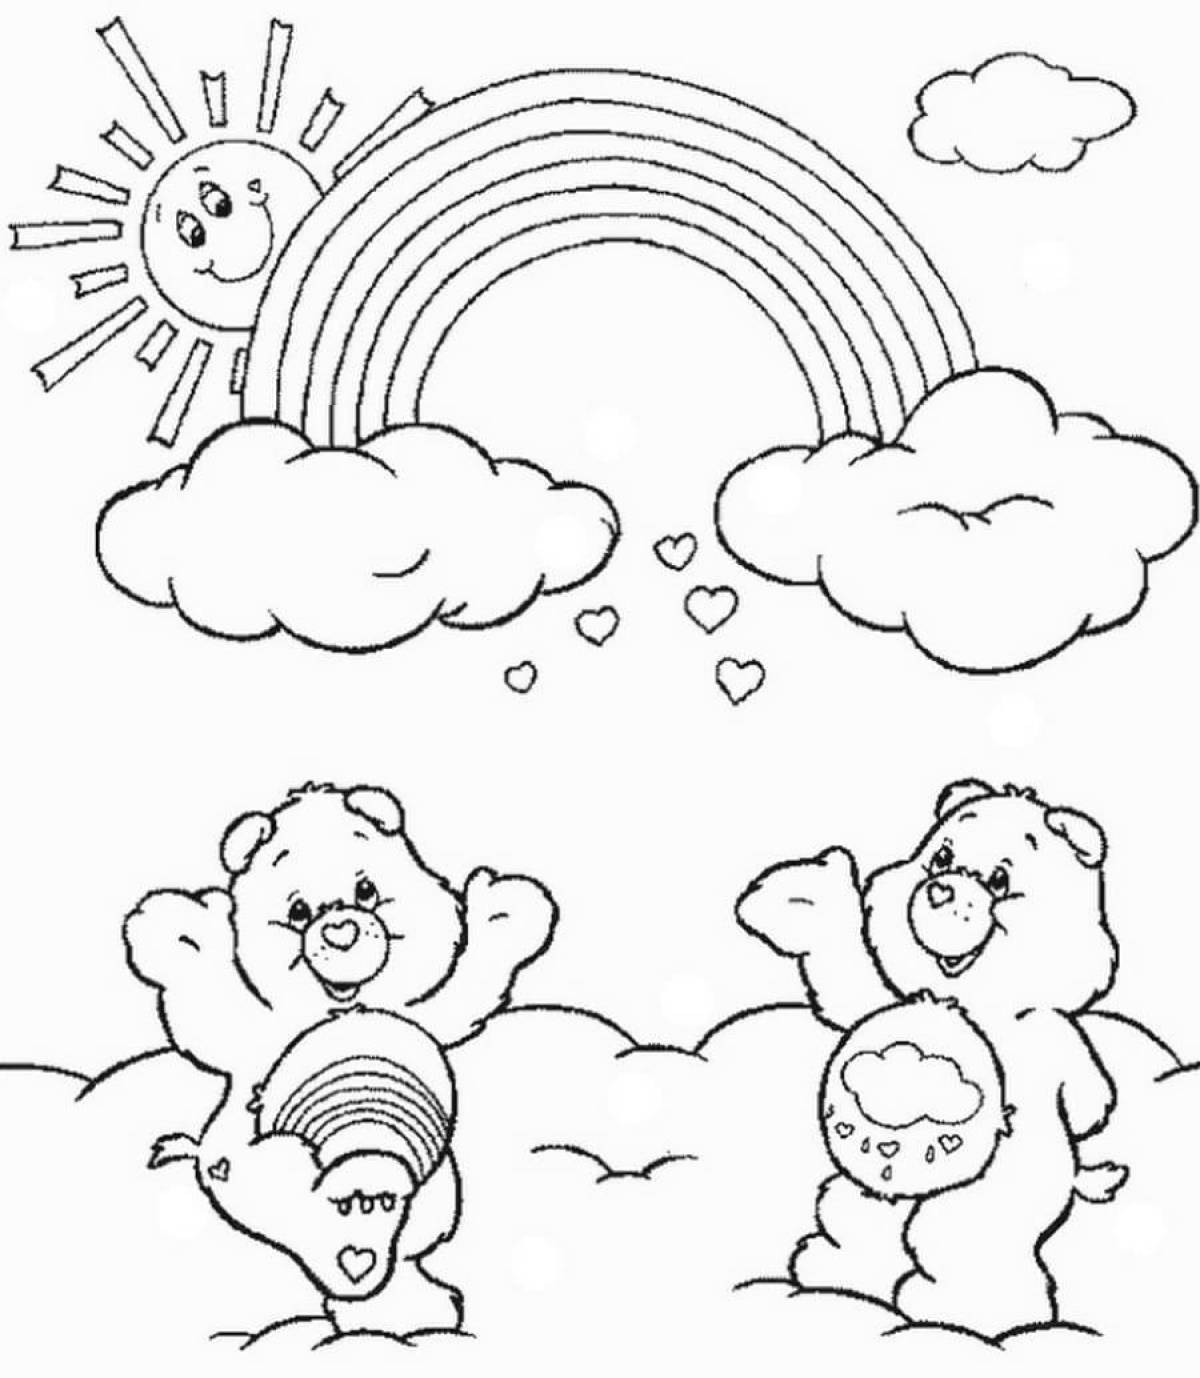 Crazy Rainbow Friends coloring page